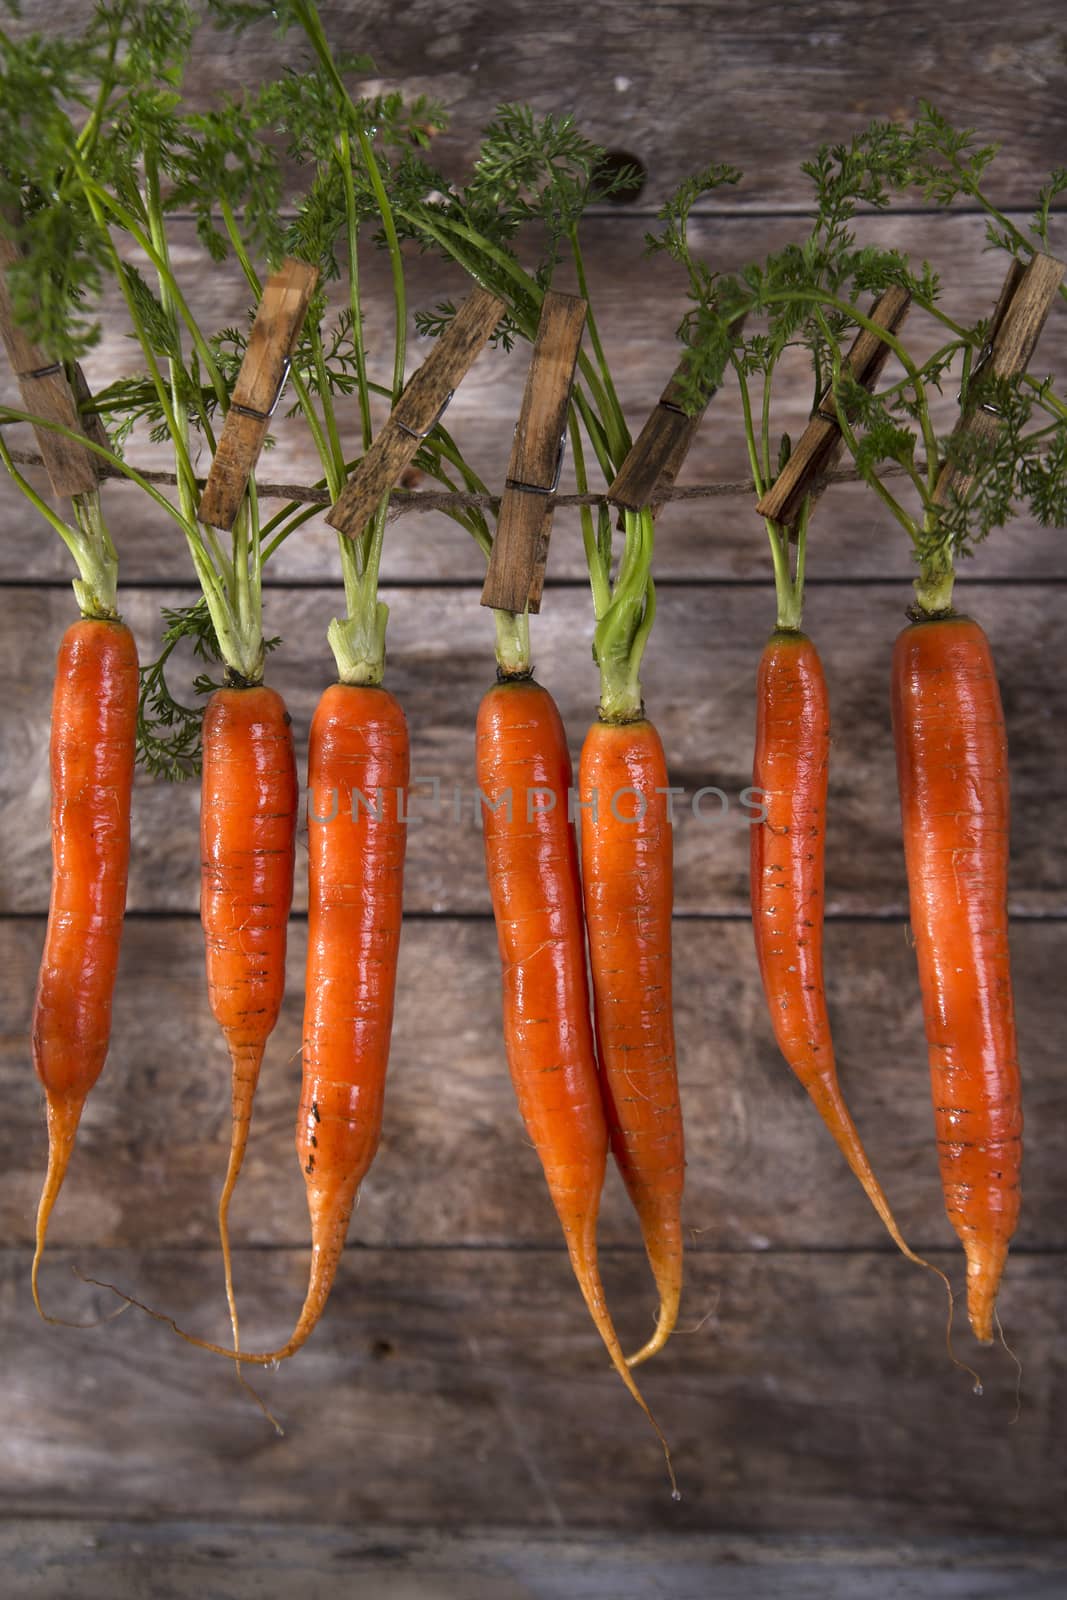 Presentation of a fresh bunch of carrots hanging by a thread
